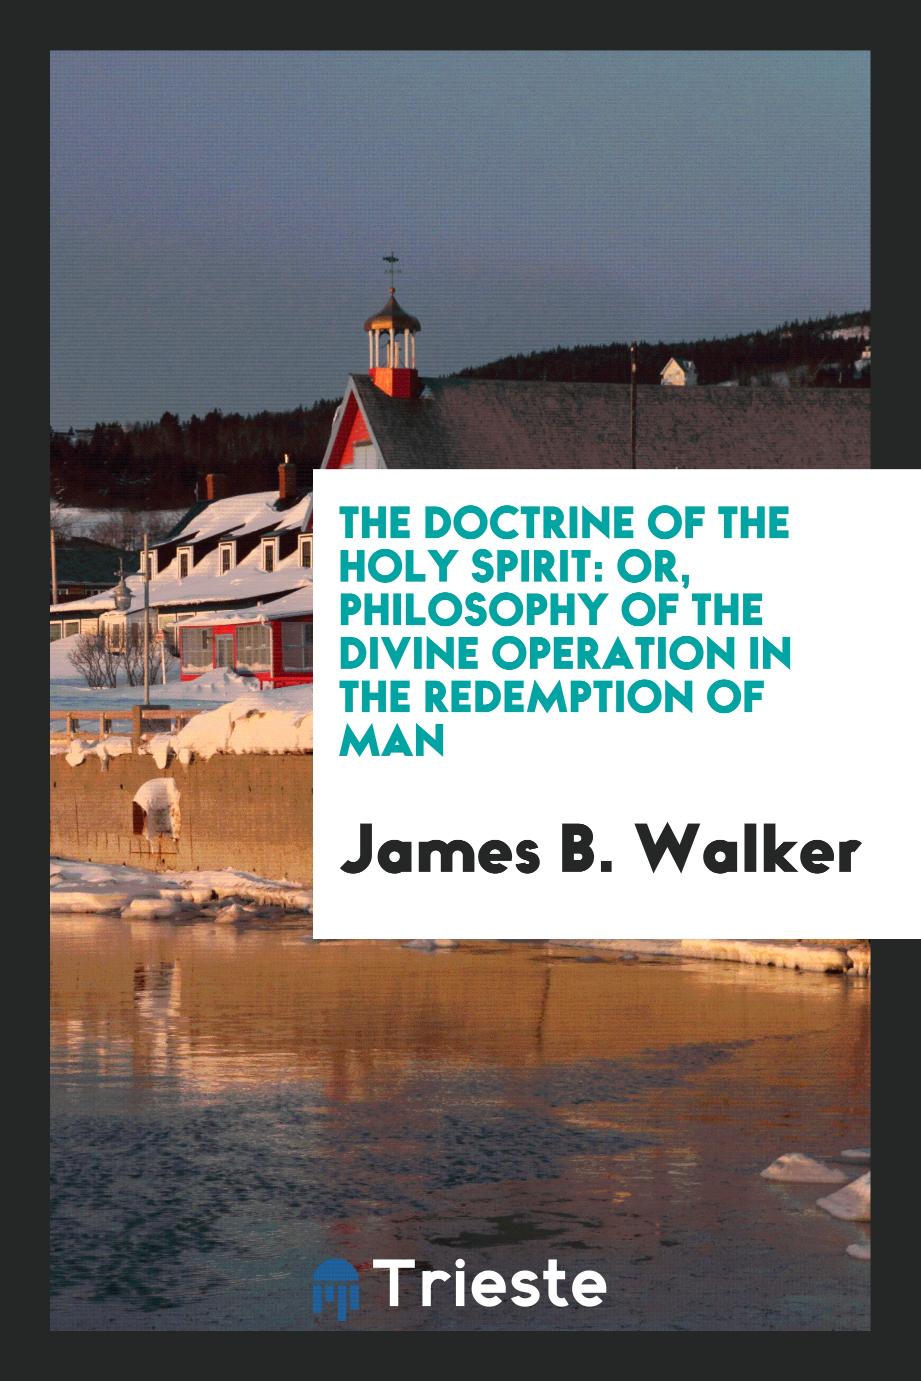 The doctrine of the Holy Spirit: or, Philosophy of the divine operation in the redemption of man